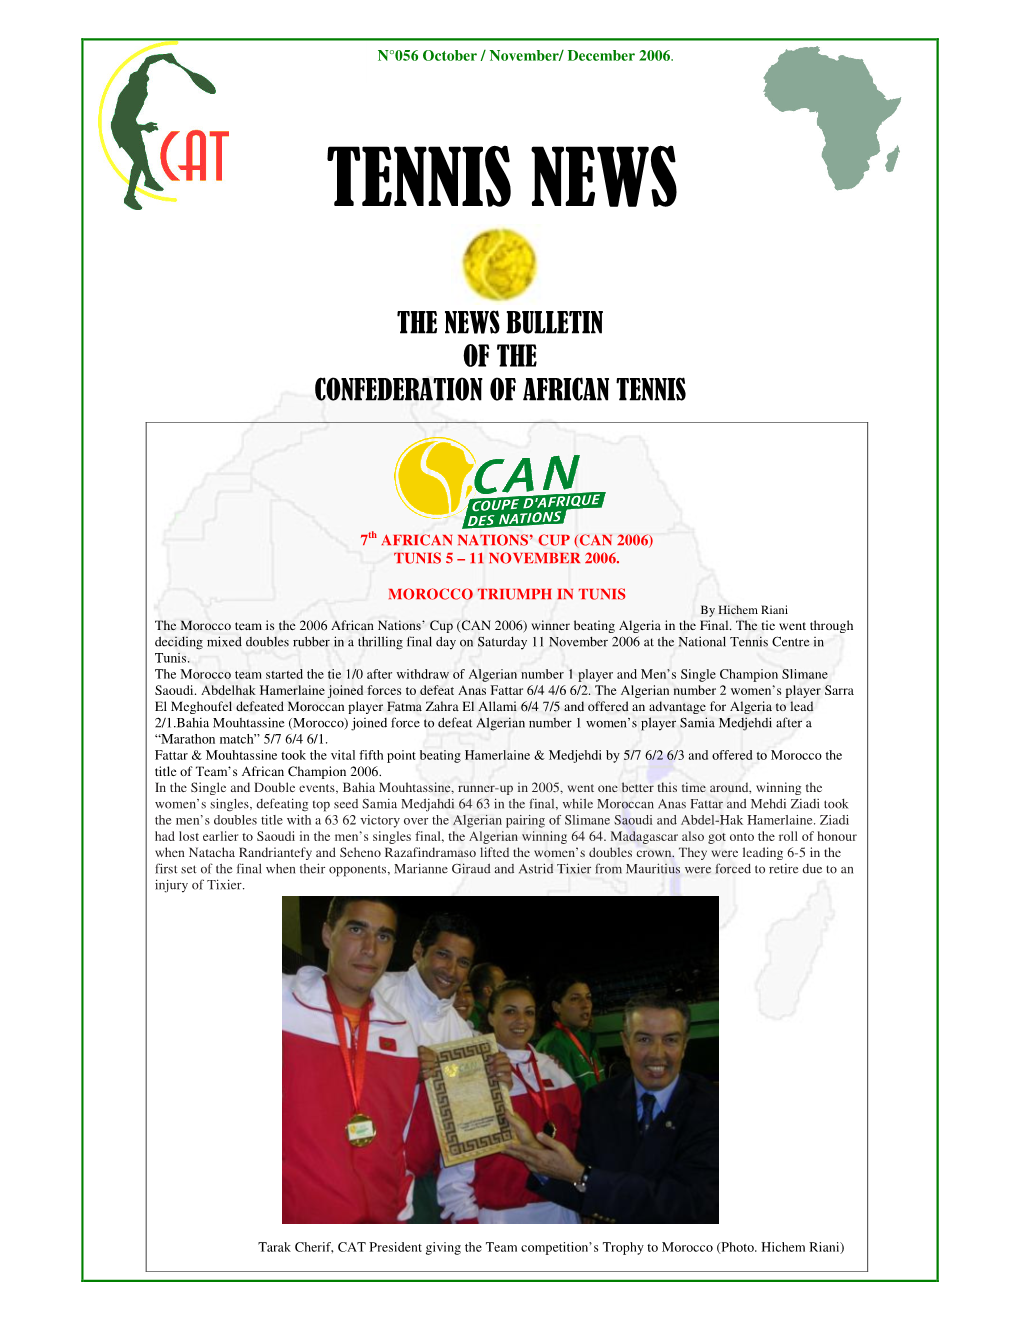 Publication of the Cat News N° 57: 2 March 2007